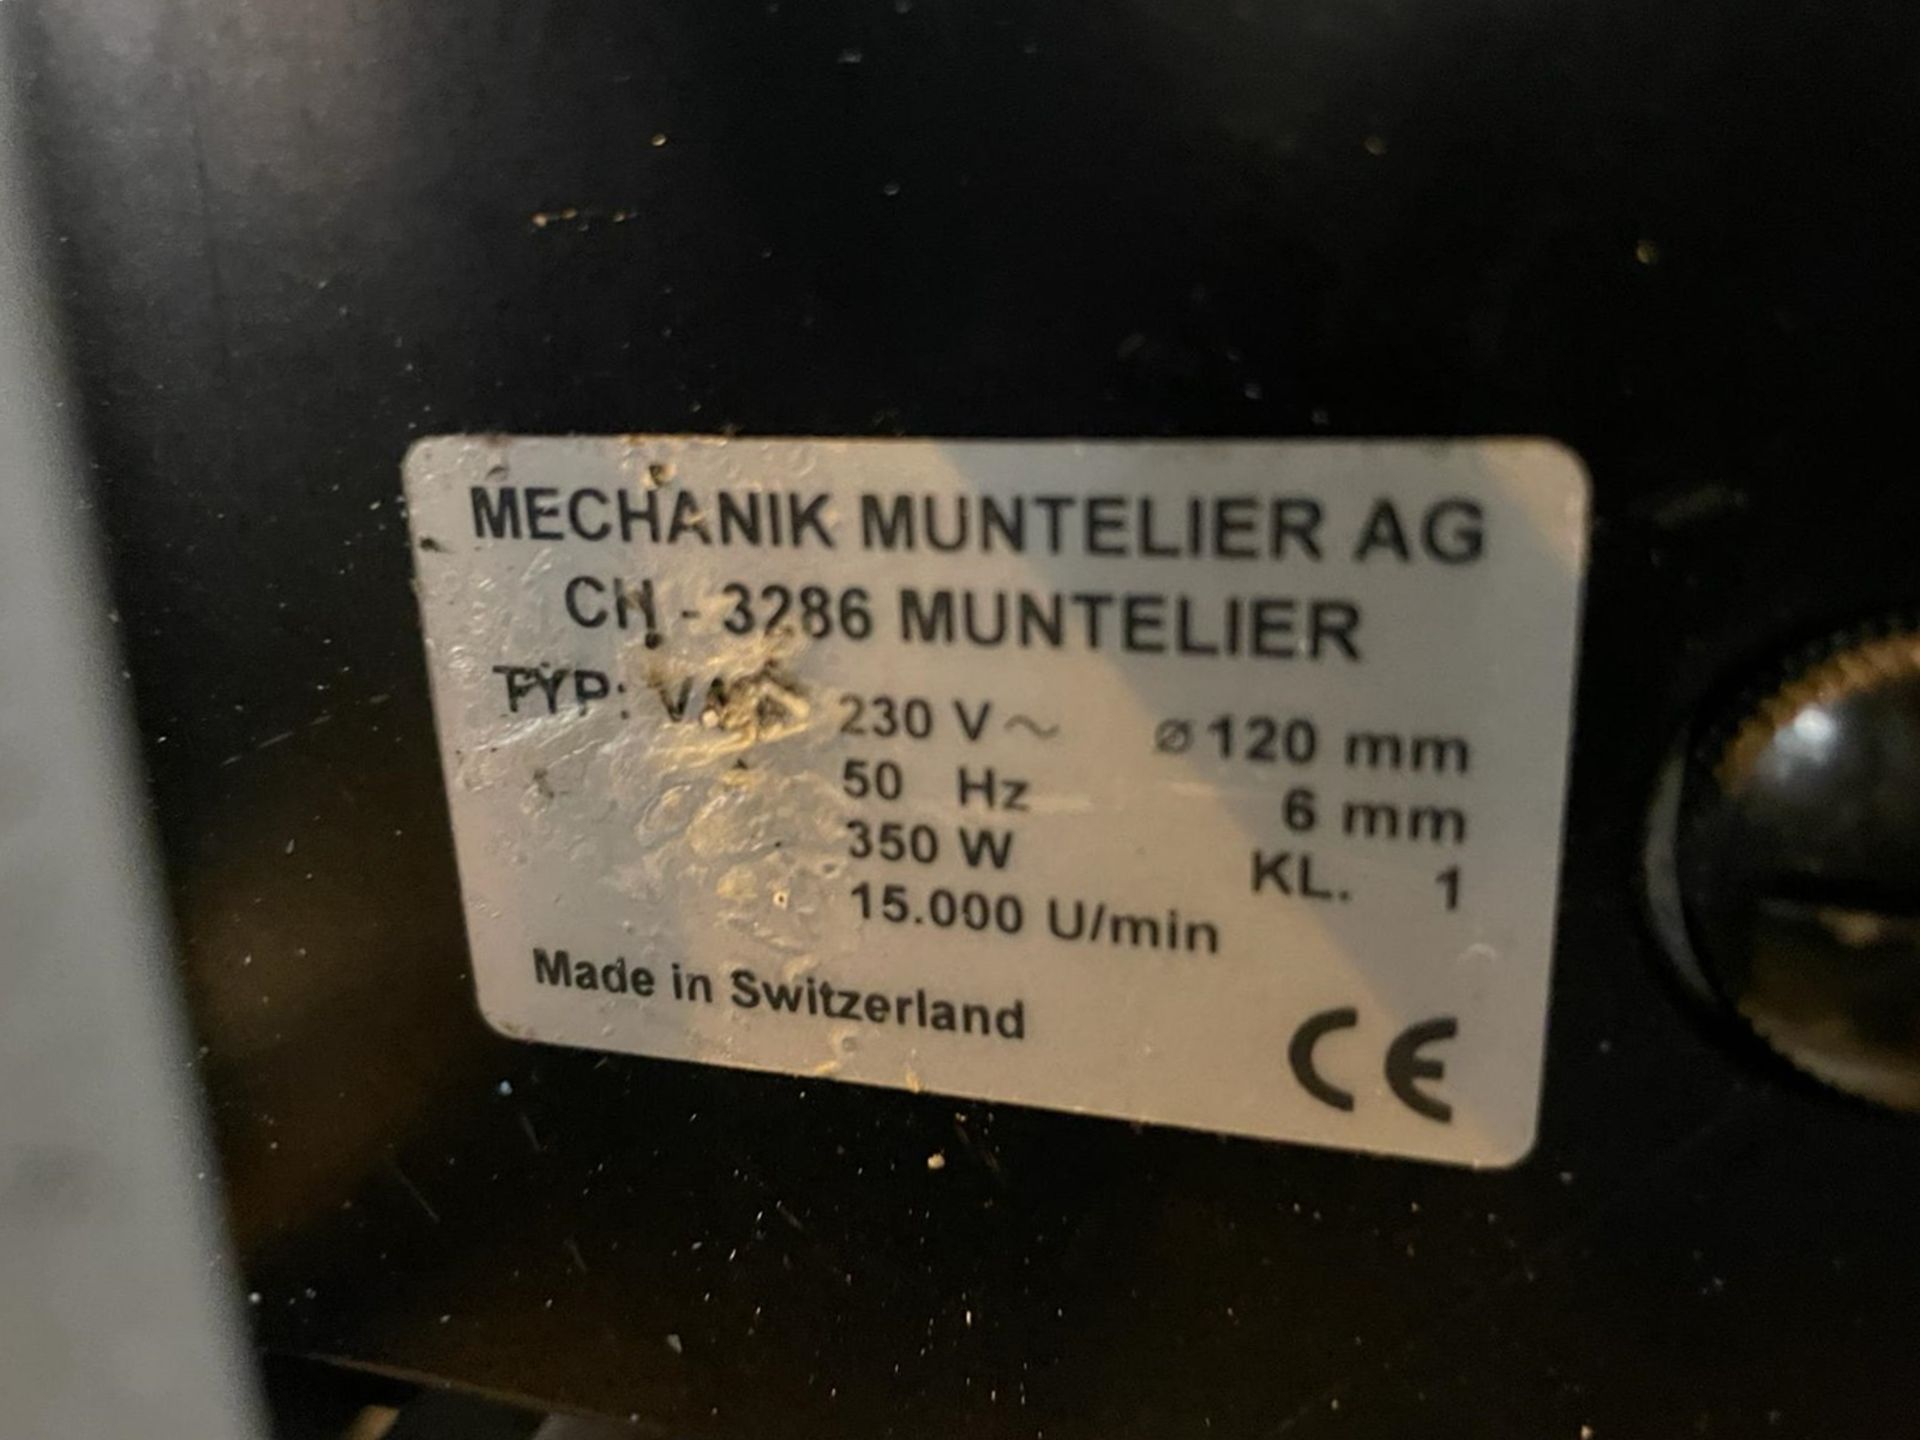 1 x Mechanik Muntelier Circular Saw For The Cutting of Plastic Materials - Image 6 of 8